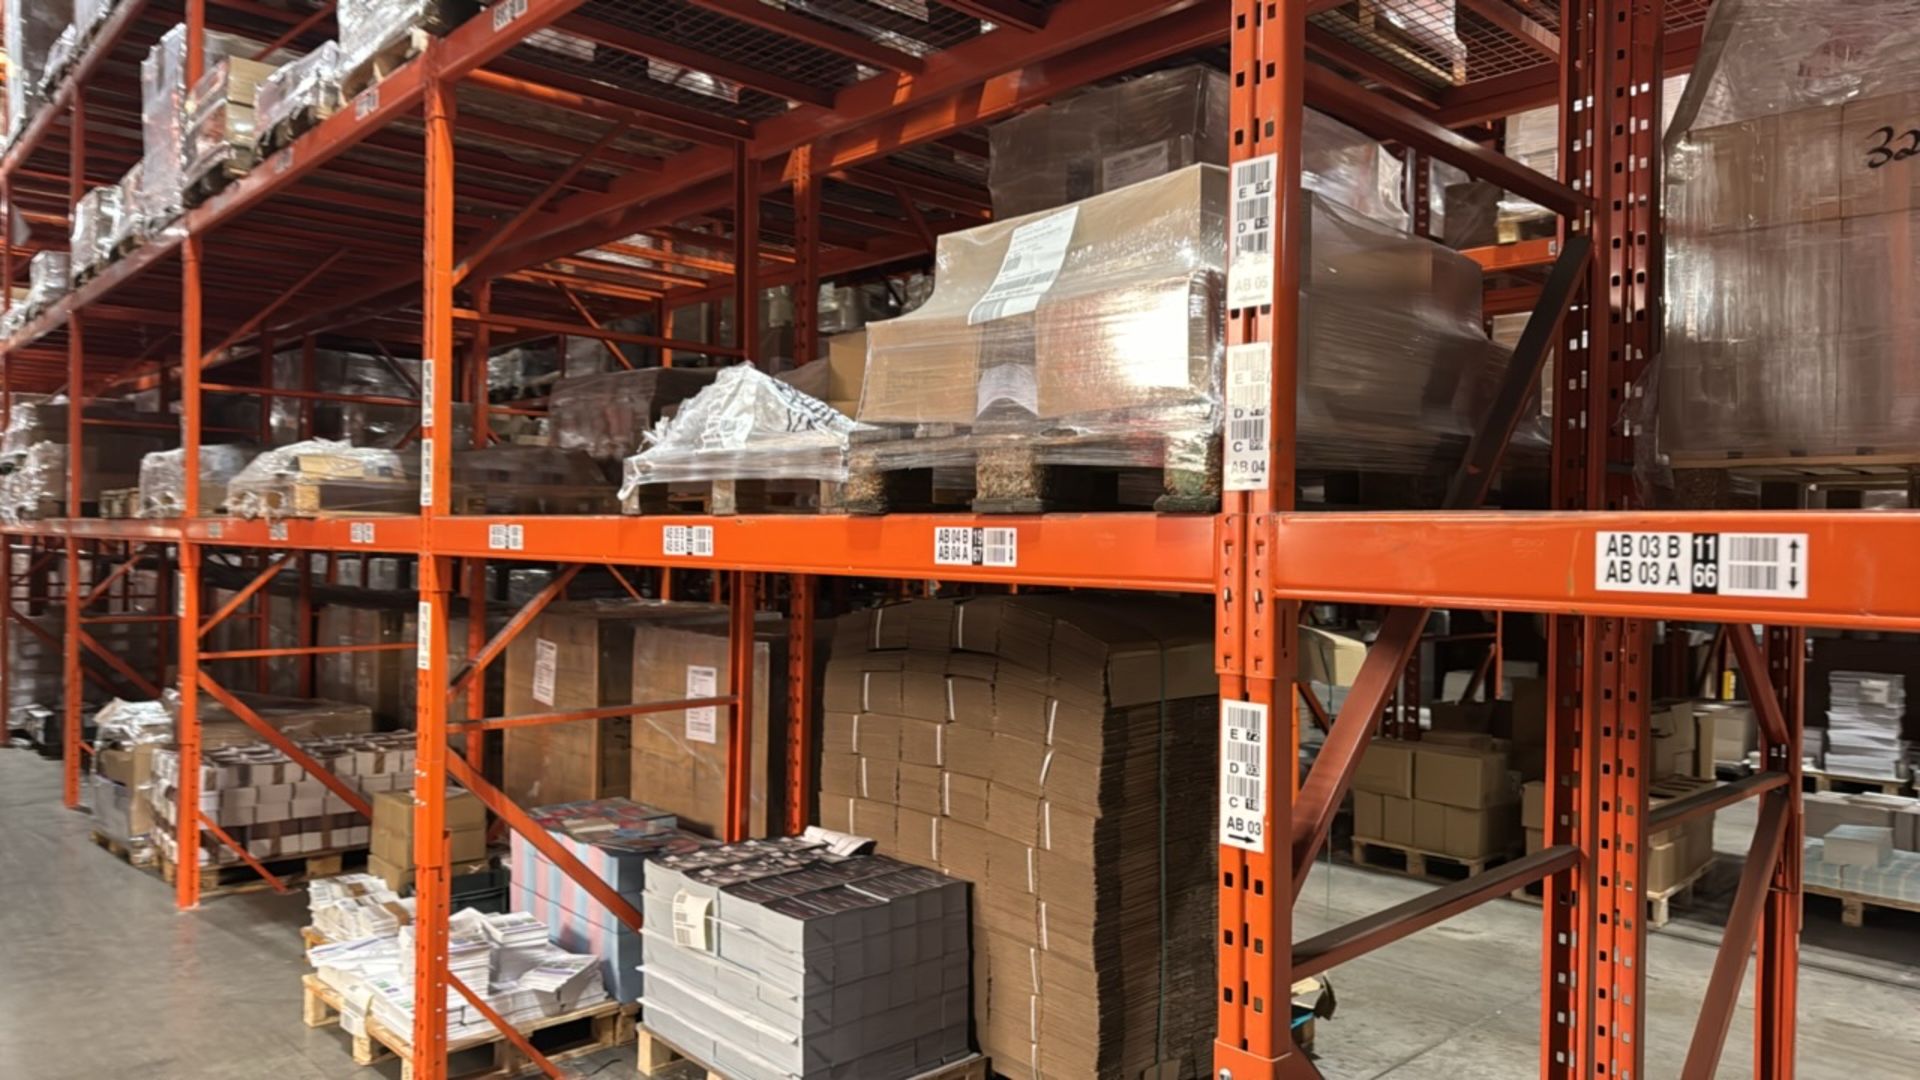 24 Bays Of Boltless Pallet Racking - Image 5 of 8